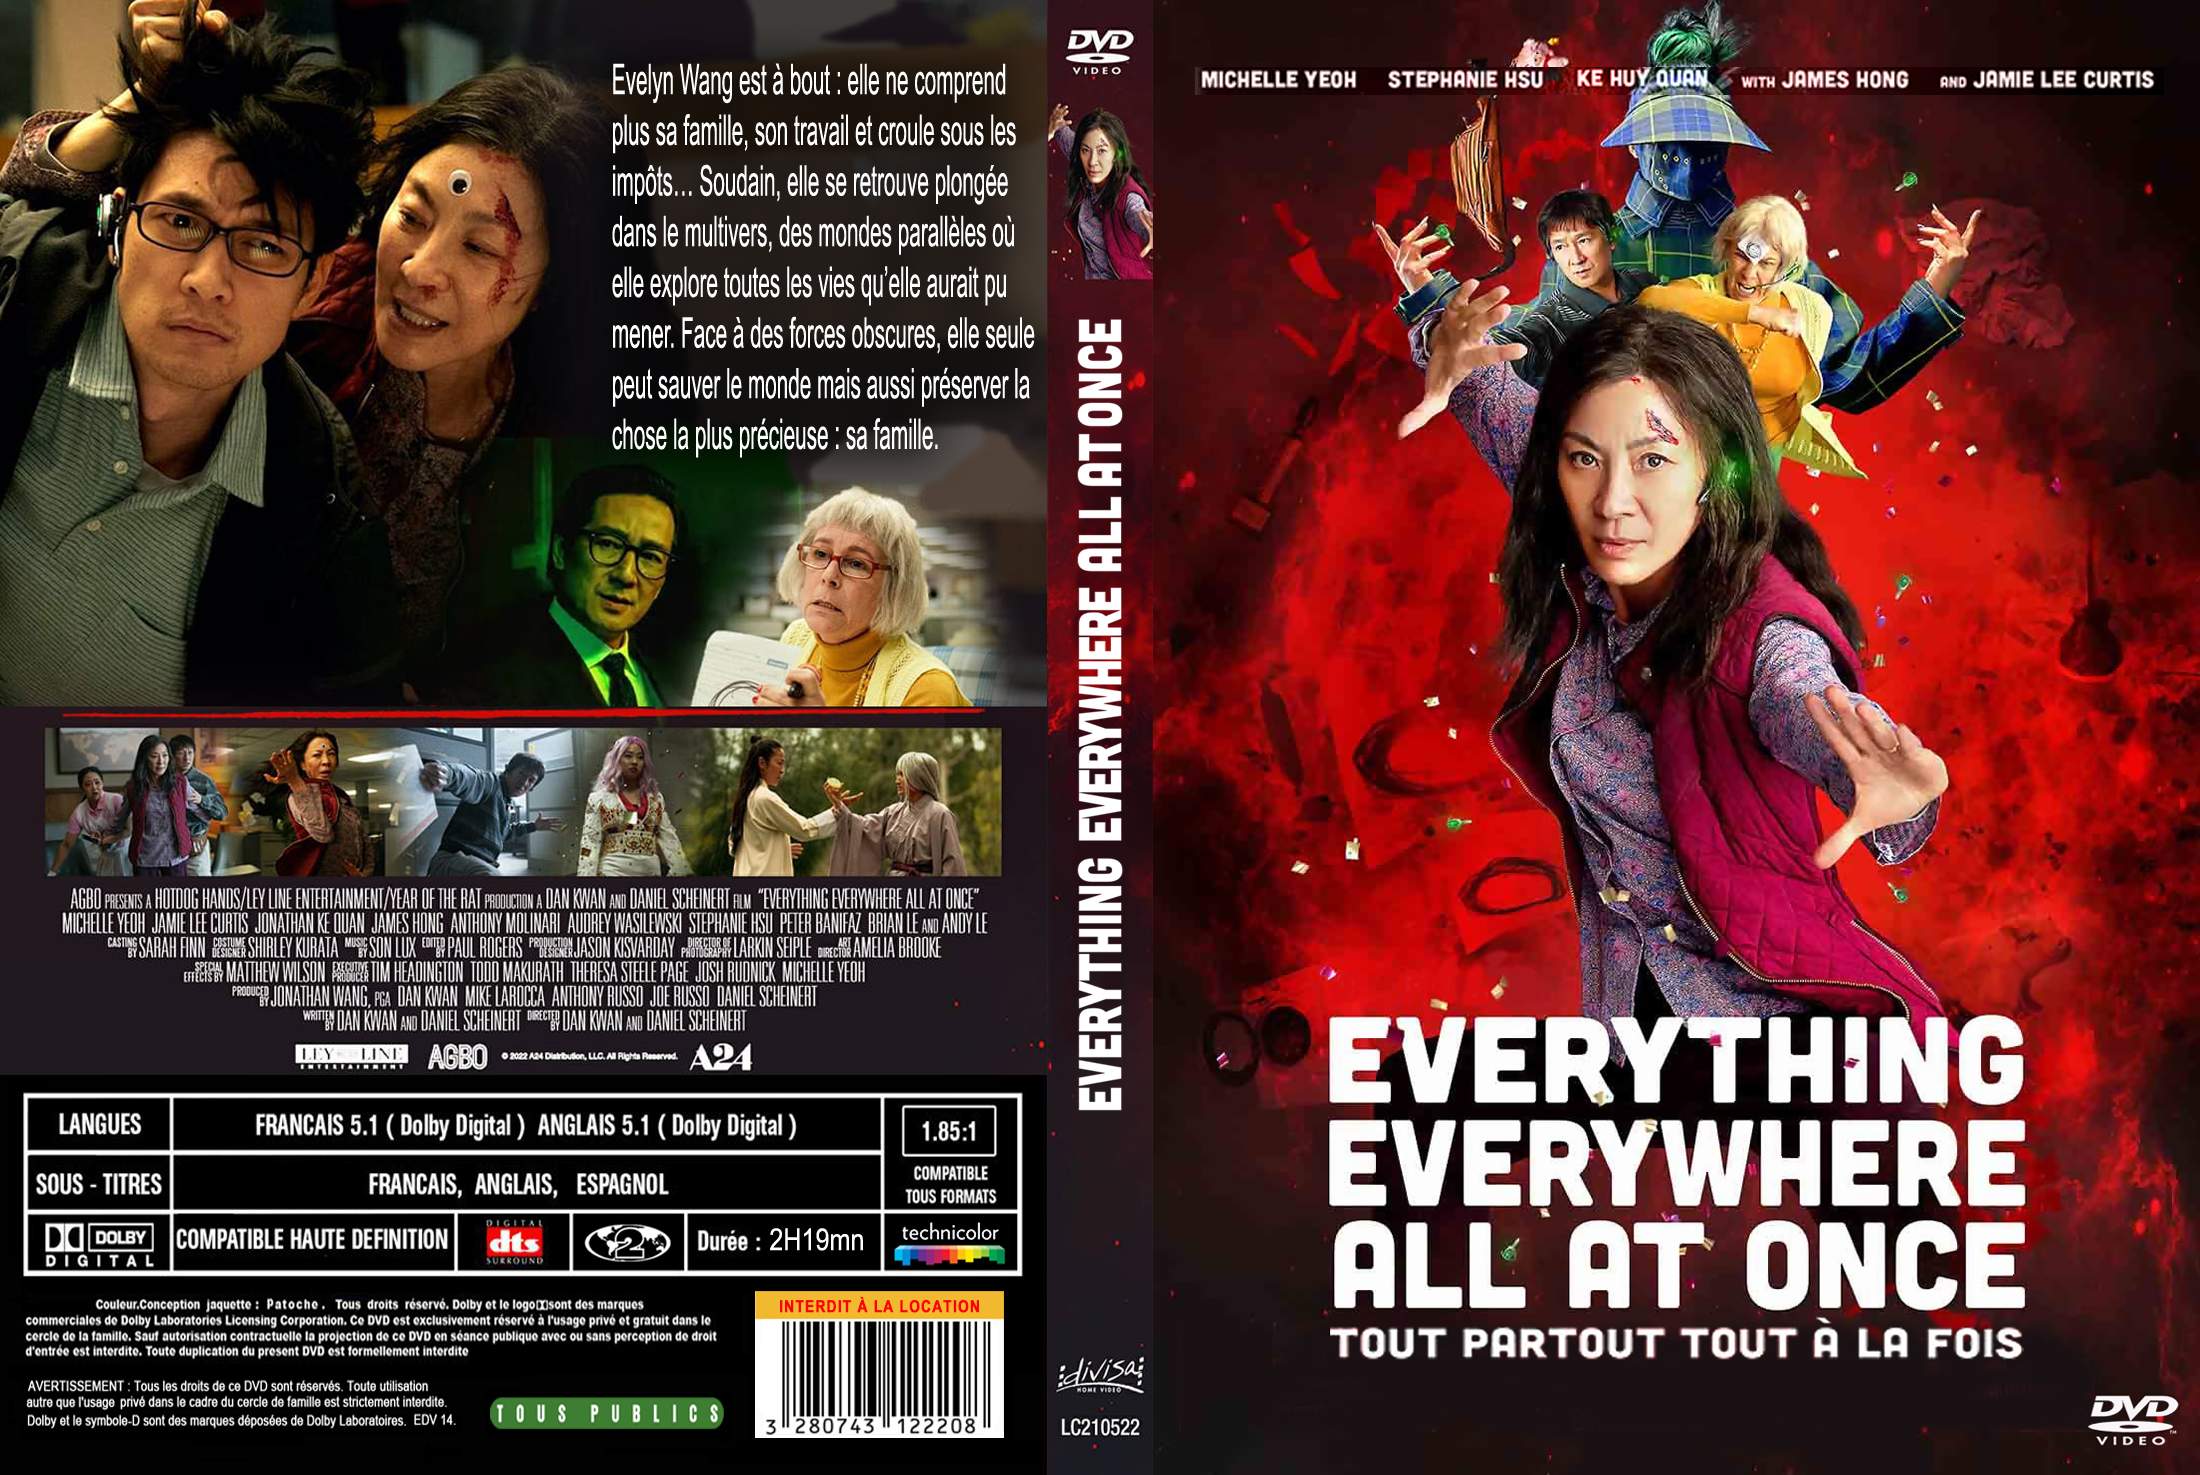 Jaquette DVD Everything Everywhere All at Once custom